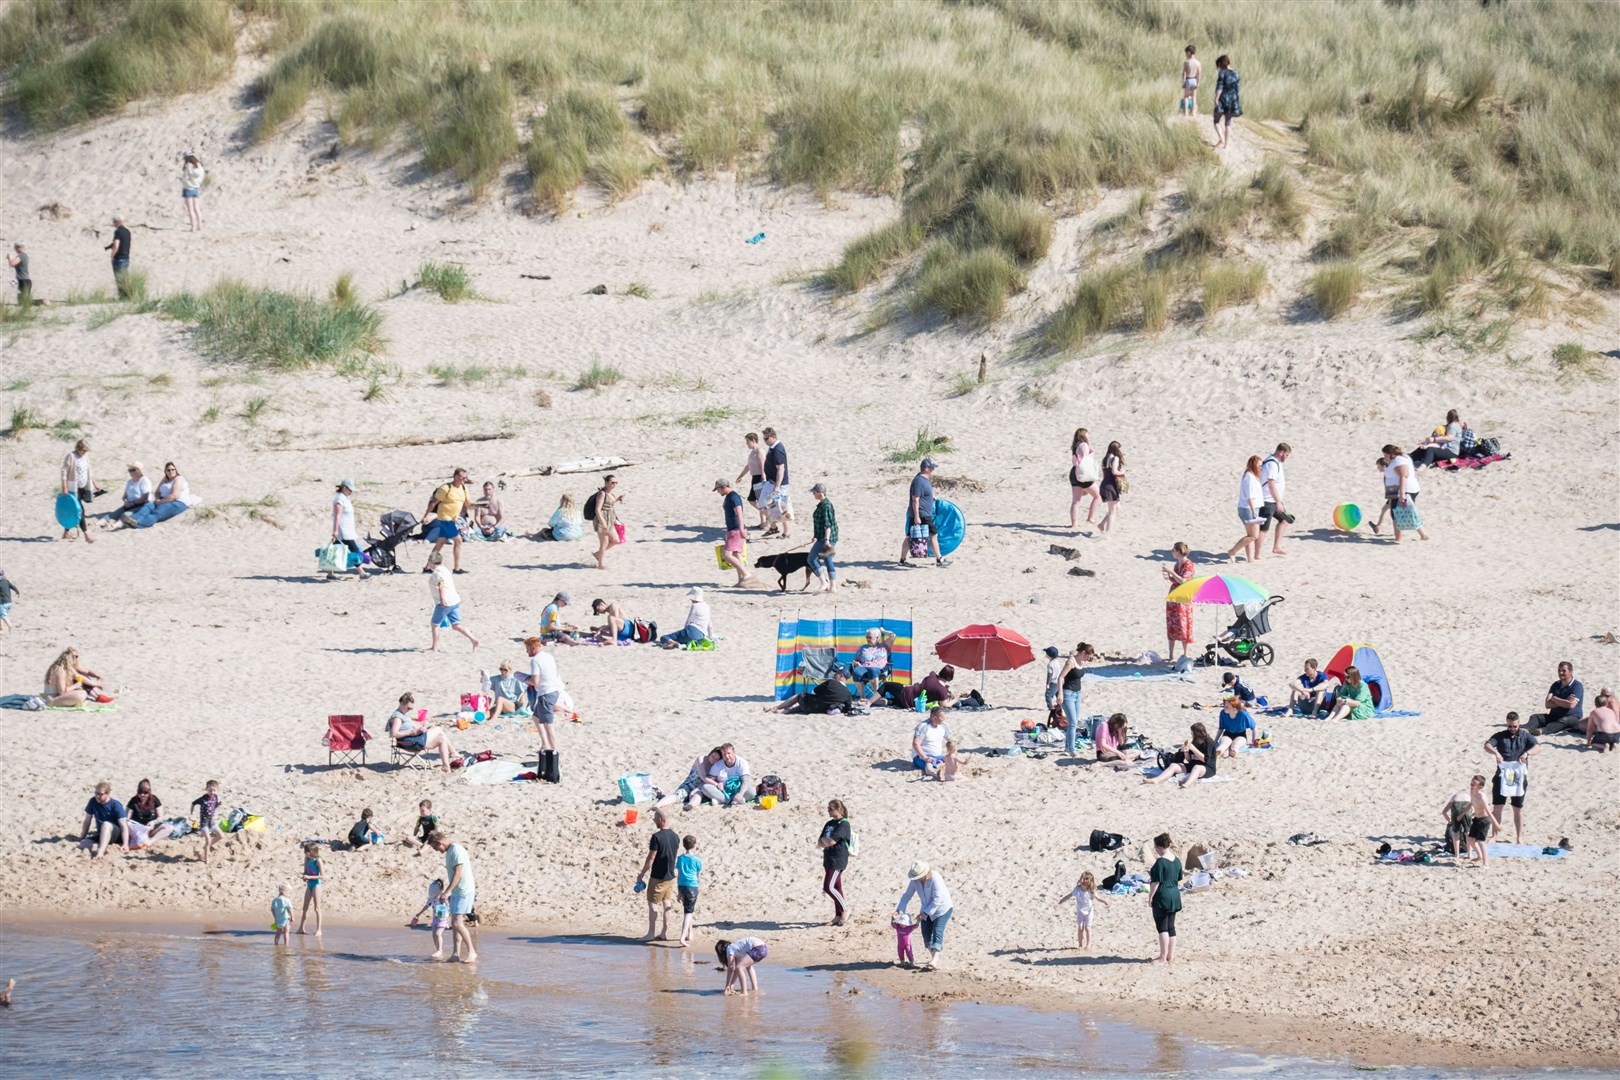 The sunshine on Saturday encouraged people to visit the beach and go for a dip in the Moray Firth. Picture: Daniel Forsyth